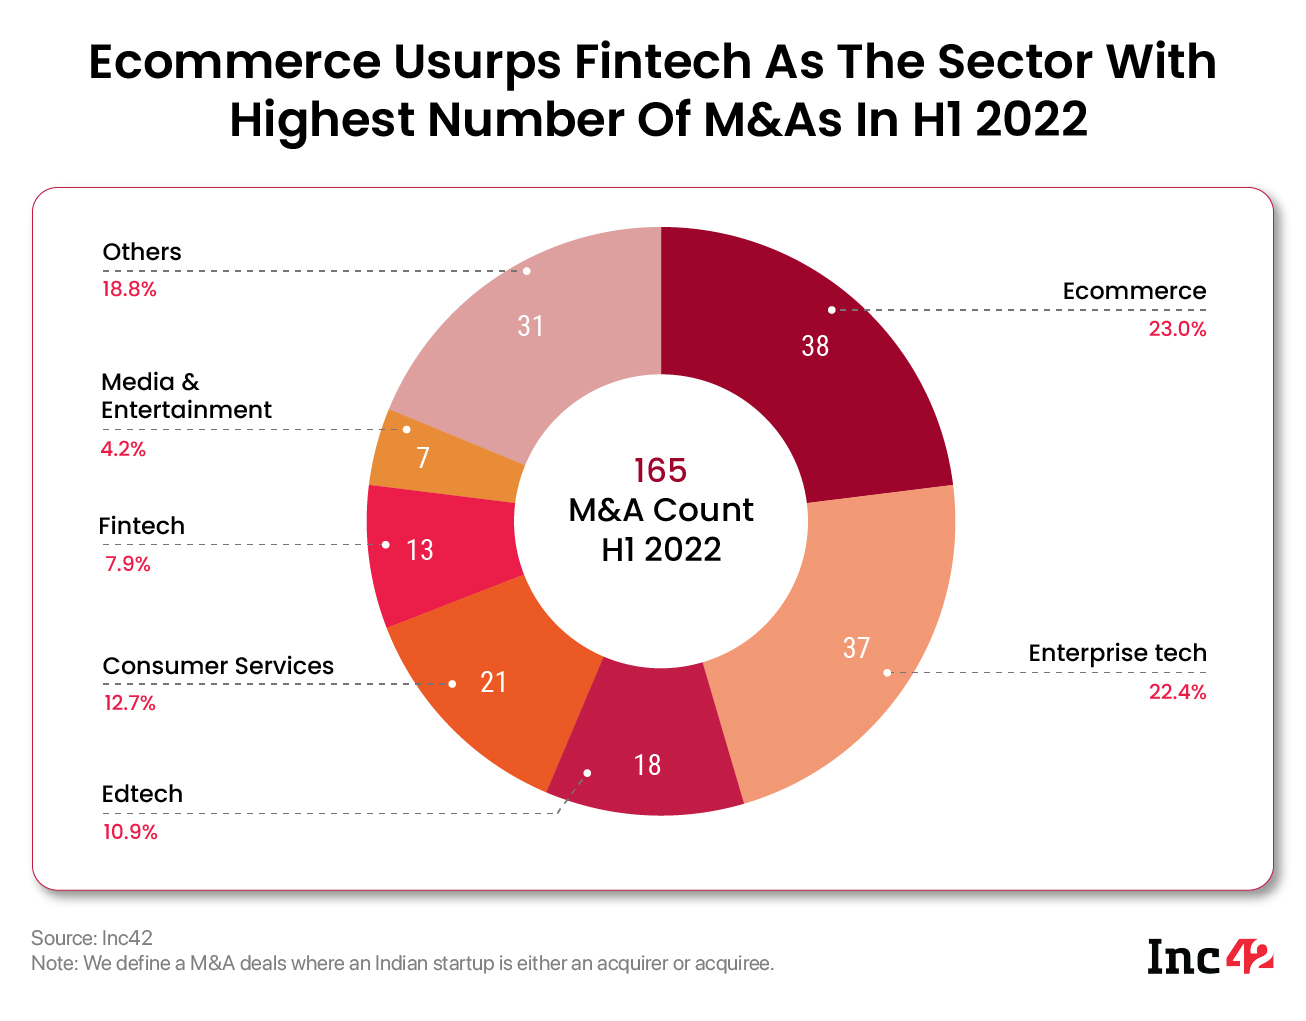 Ecommerce saw the most mergers and acquisitions